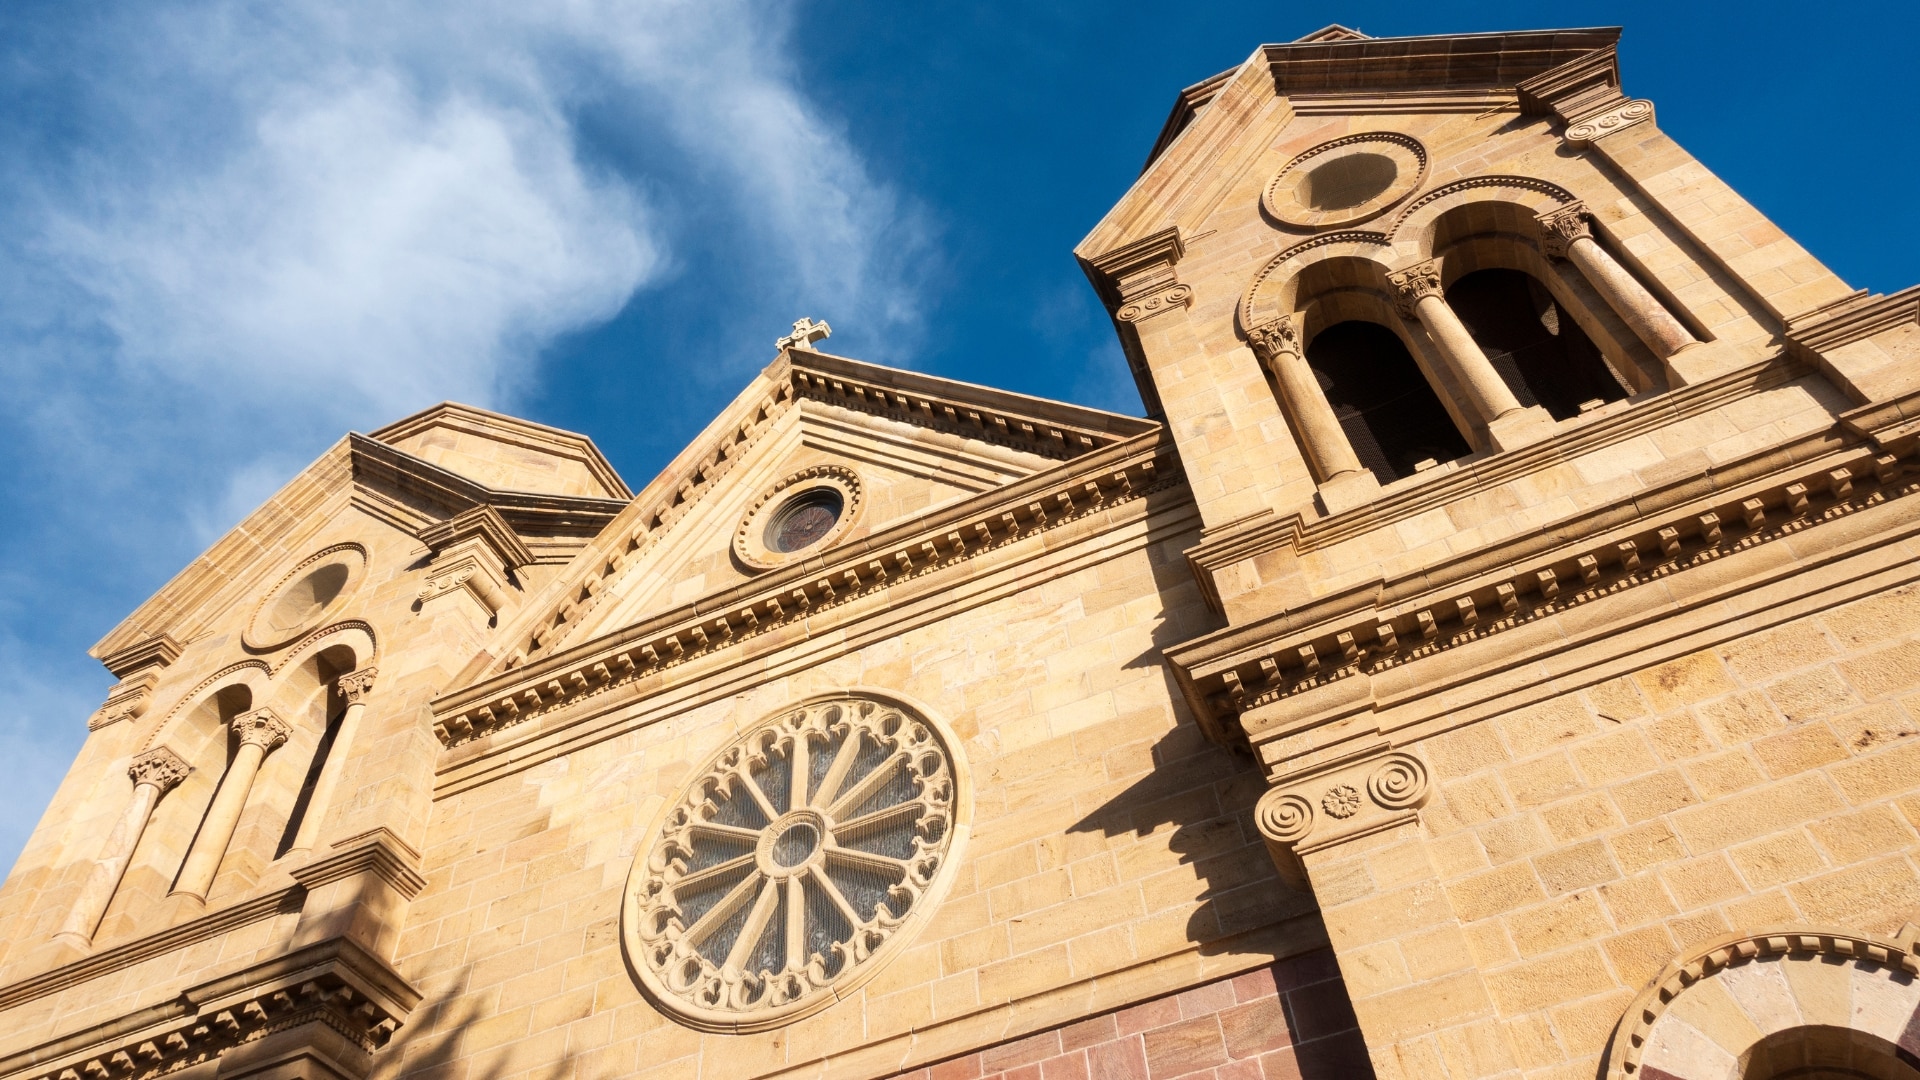 The brightly lit facade of Cathedral Basilica of St. Francis in downtown Santa Fe